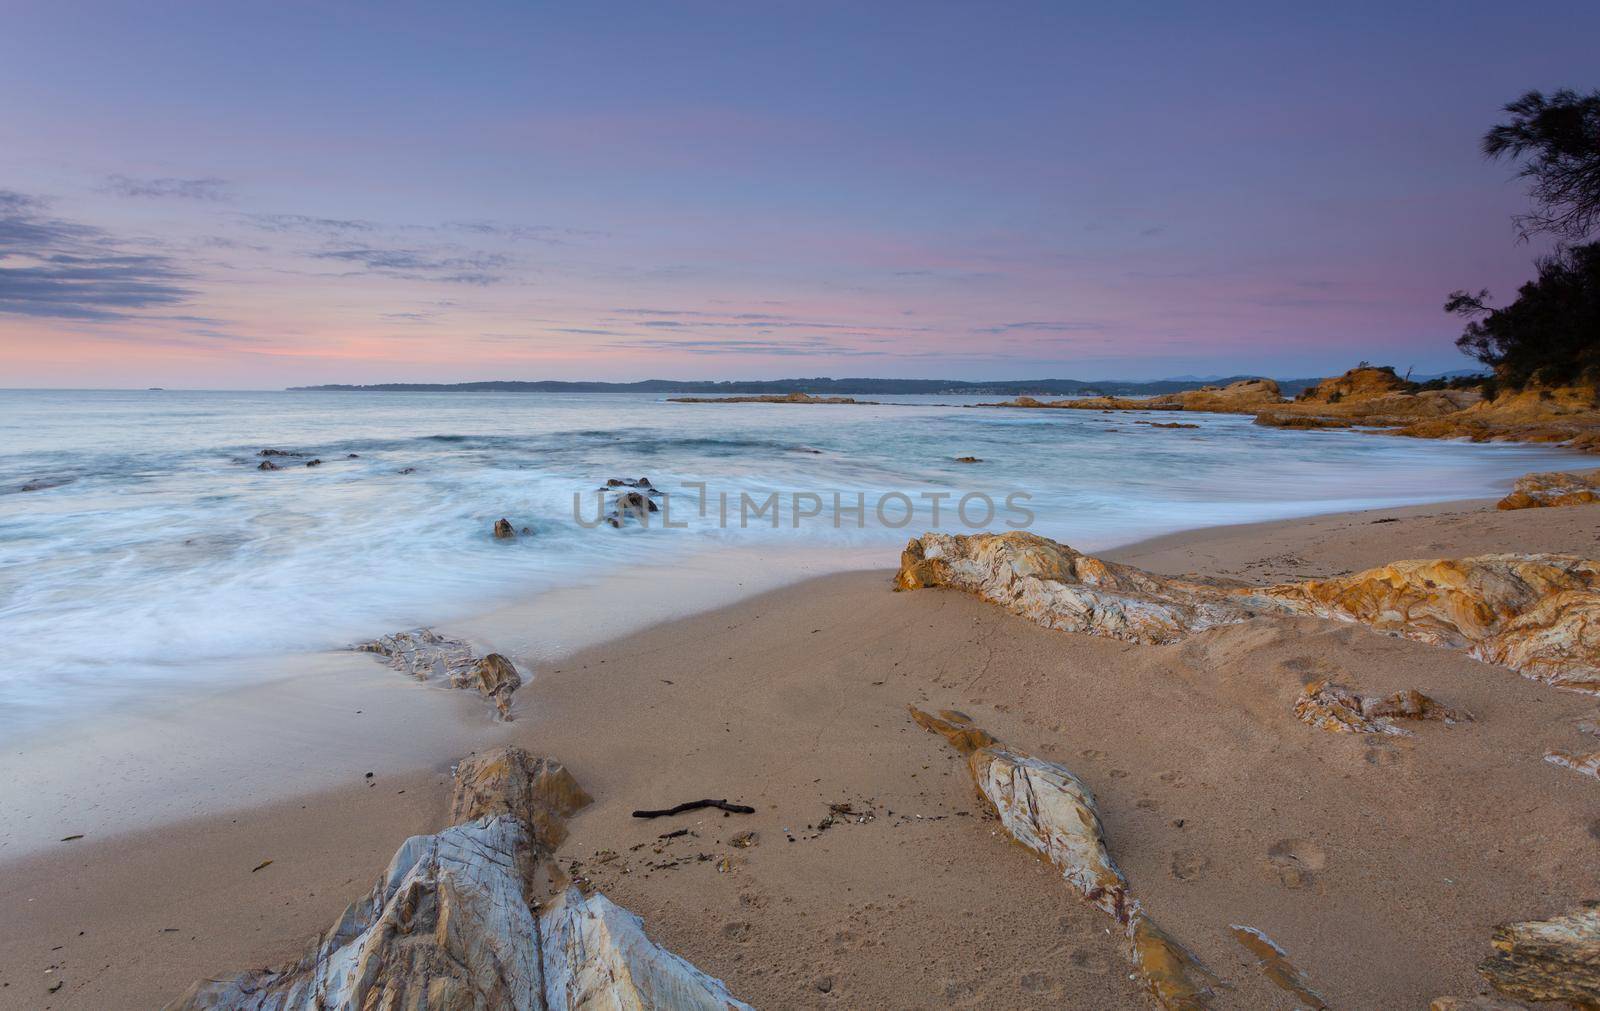 Waves gently lap the beach in the dawn morning light on a quiet beach in NSW Australia